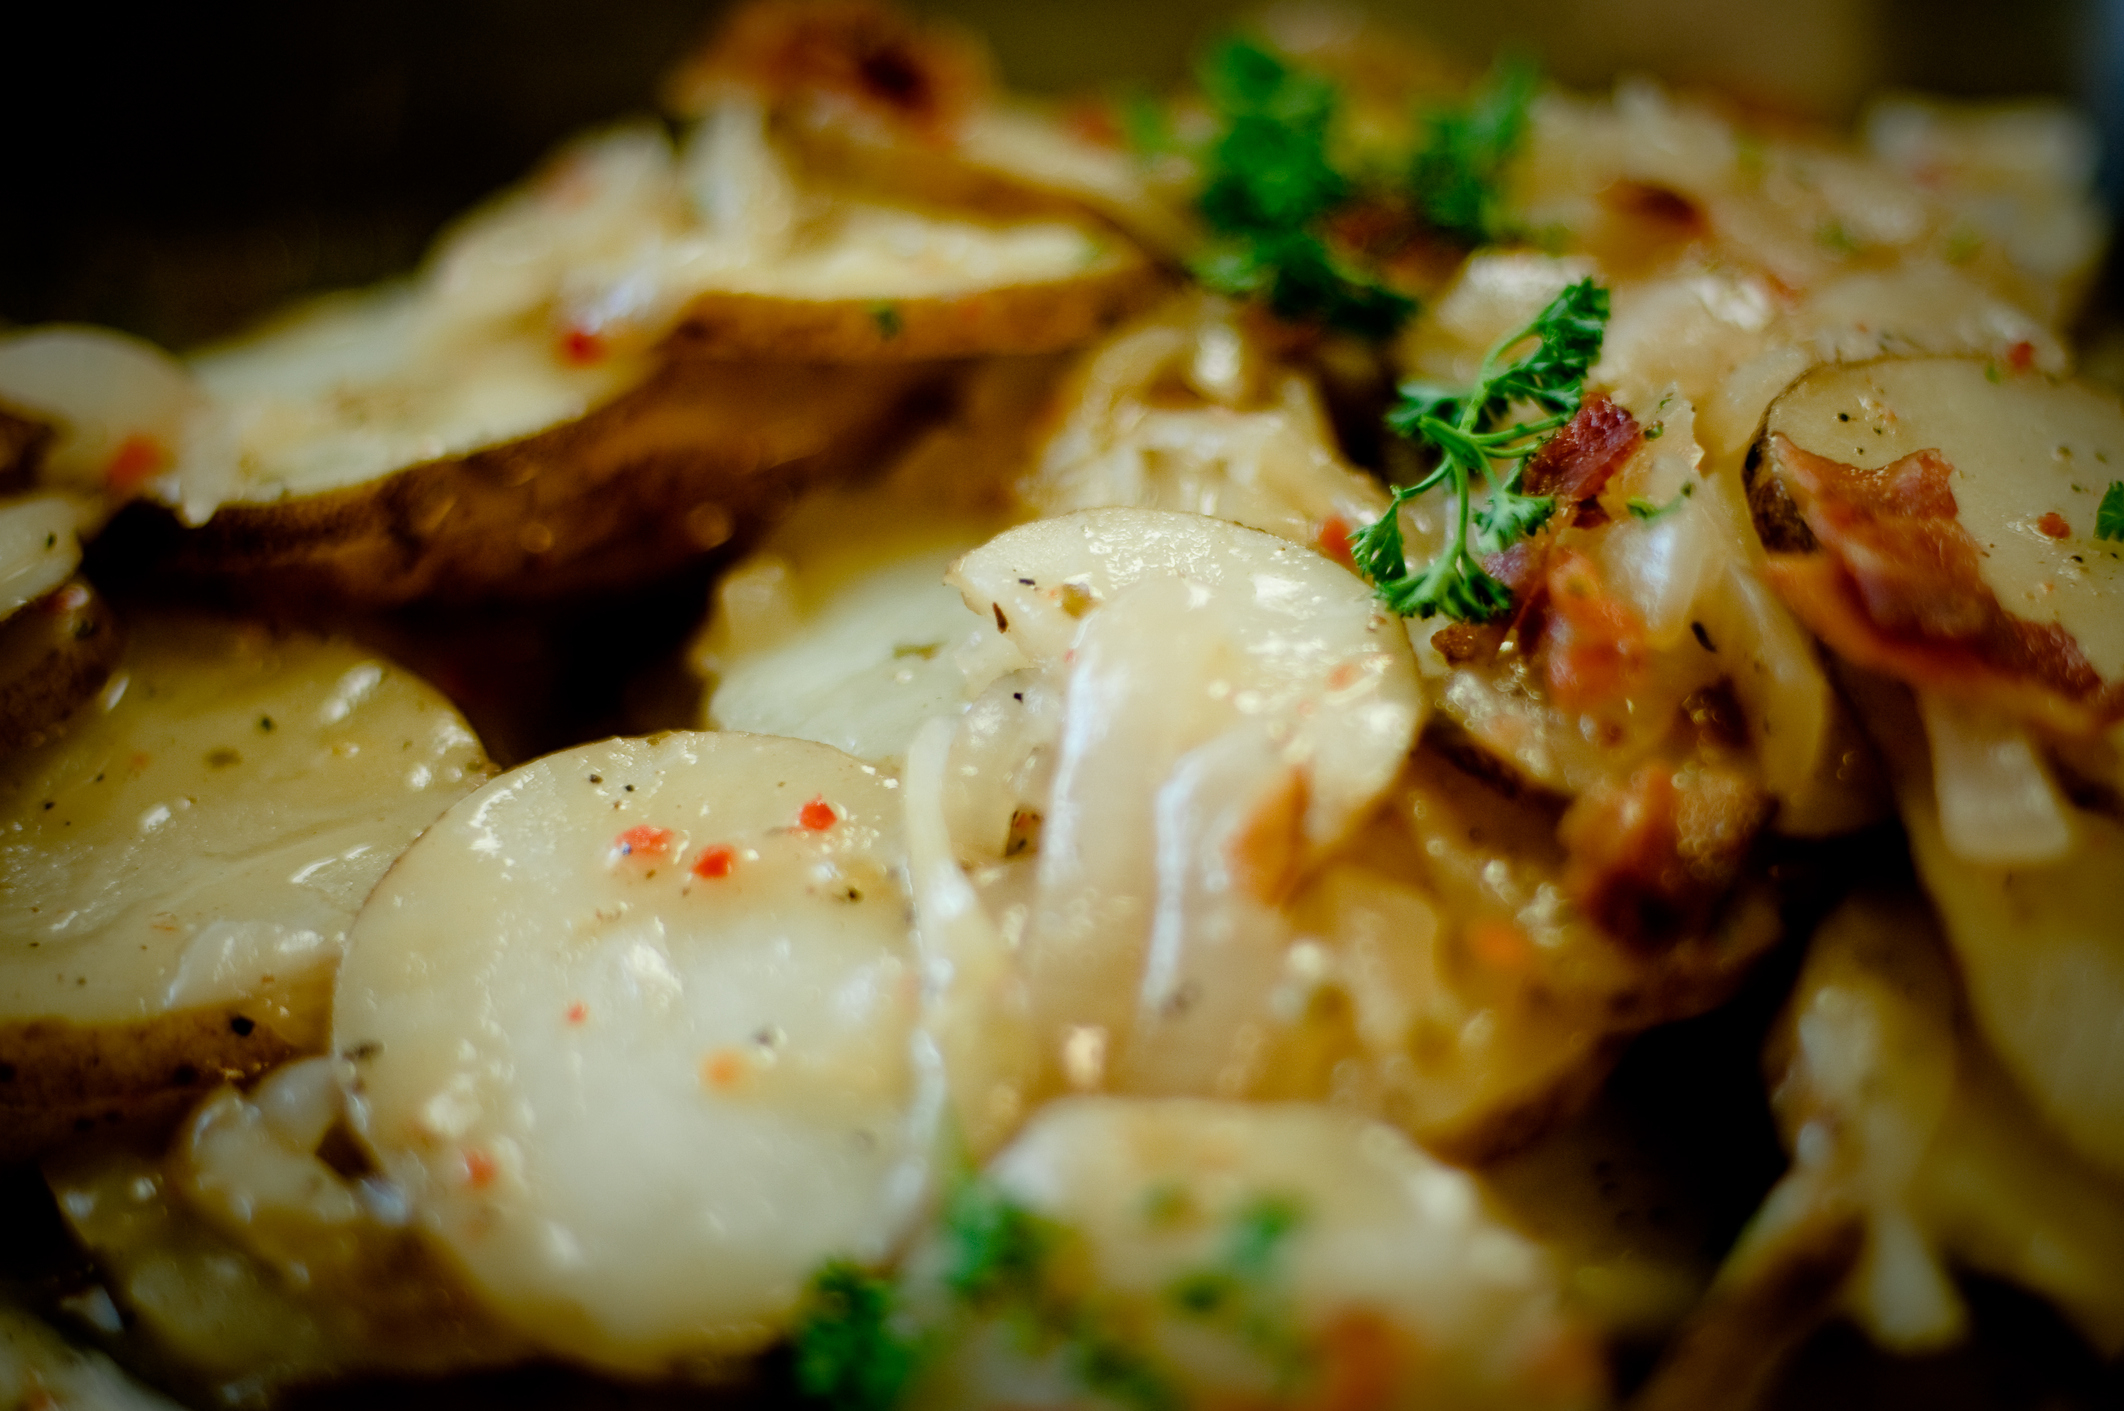 Close-up of a dish with sliced potatoes, herbs, and bacon